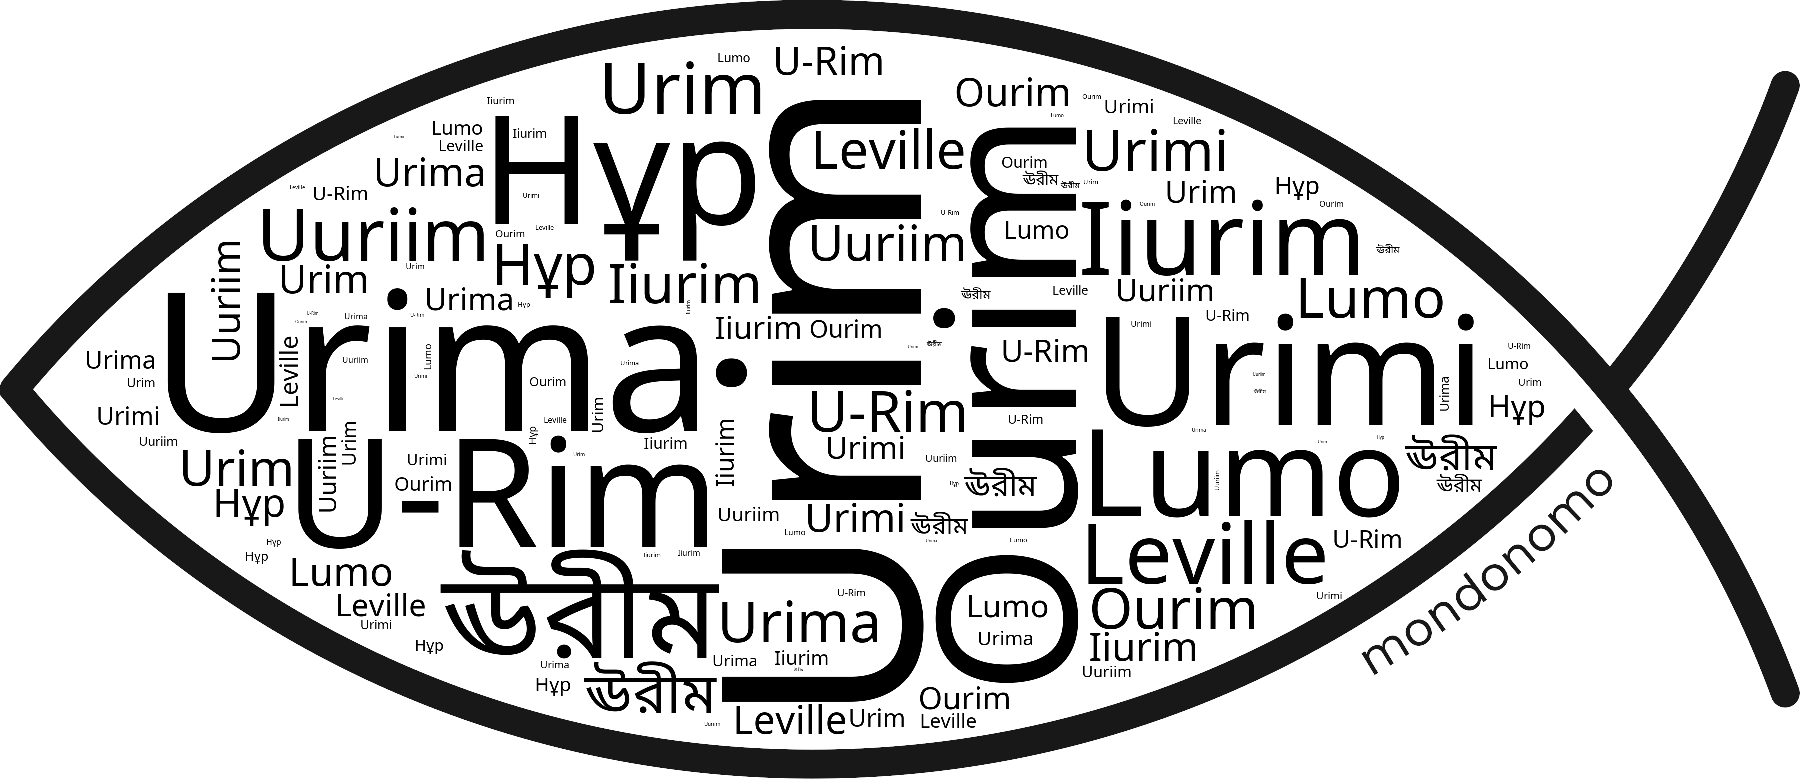 Name Urim in the world's Bibles